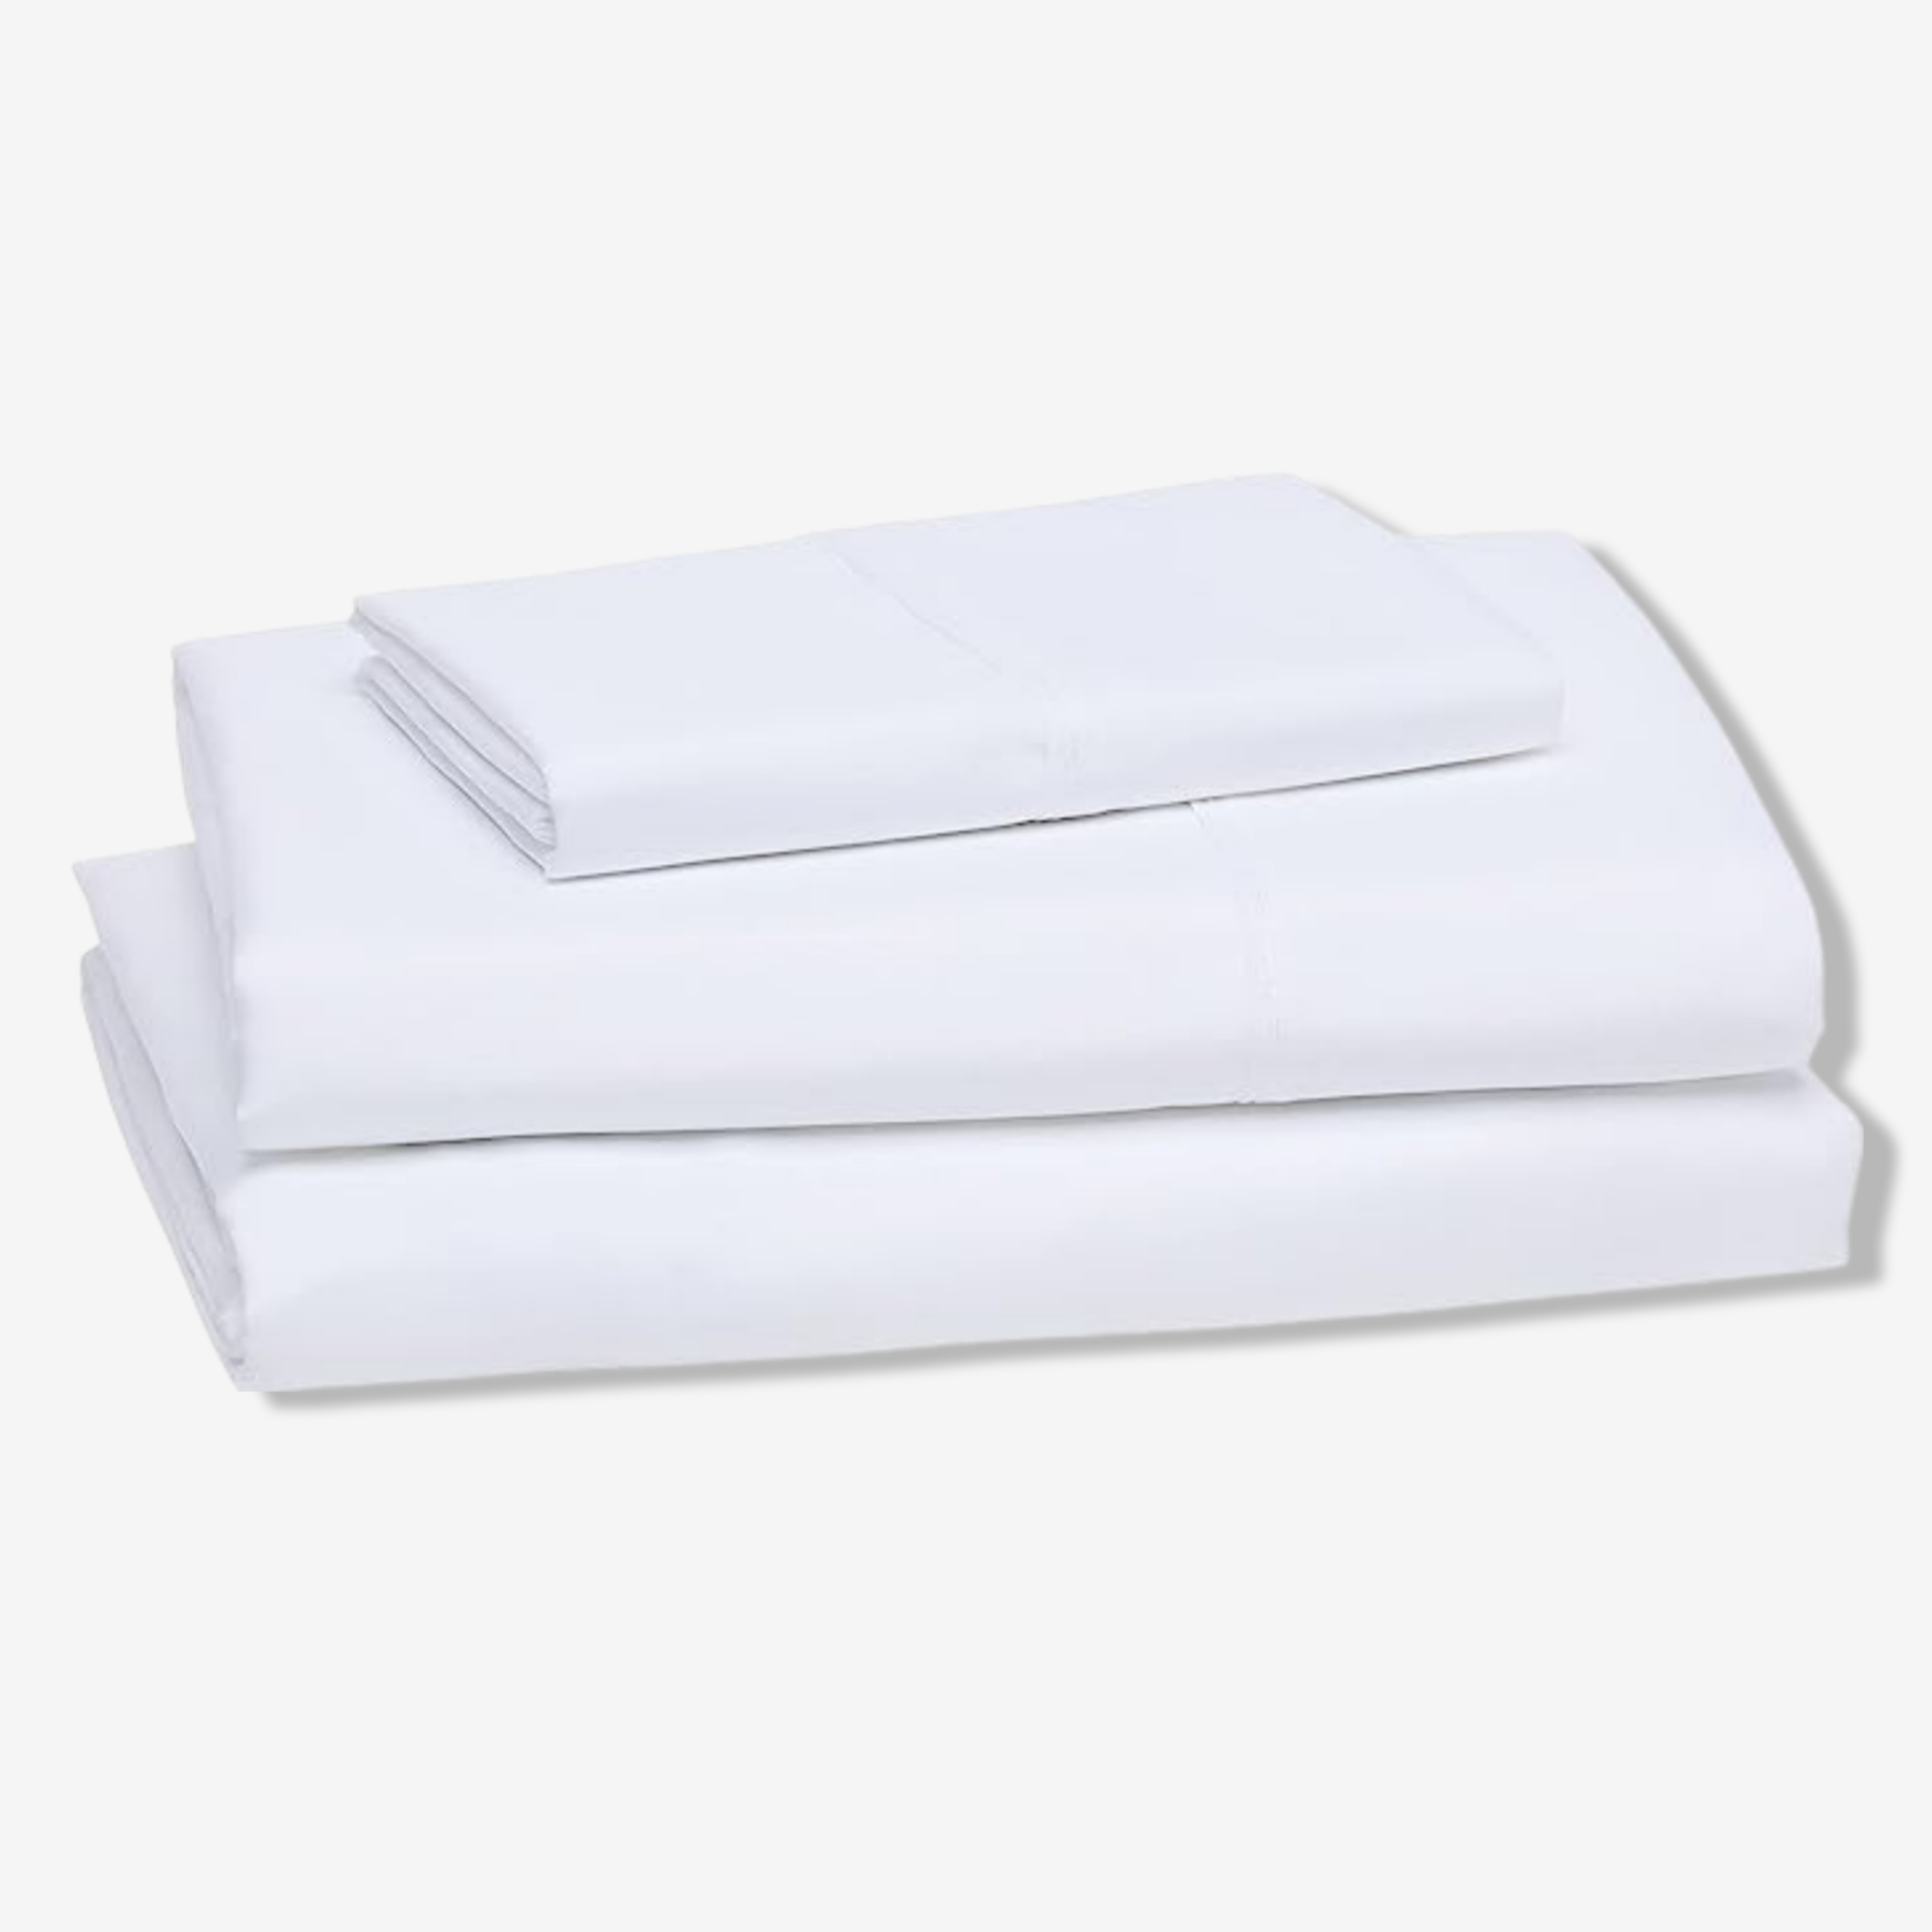 Bed Sheet Set with 14-Inch Deep Pockets